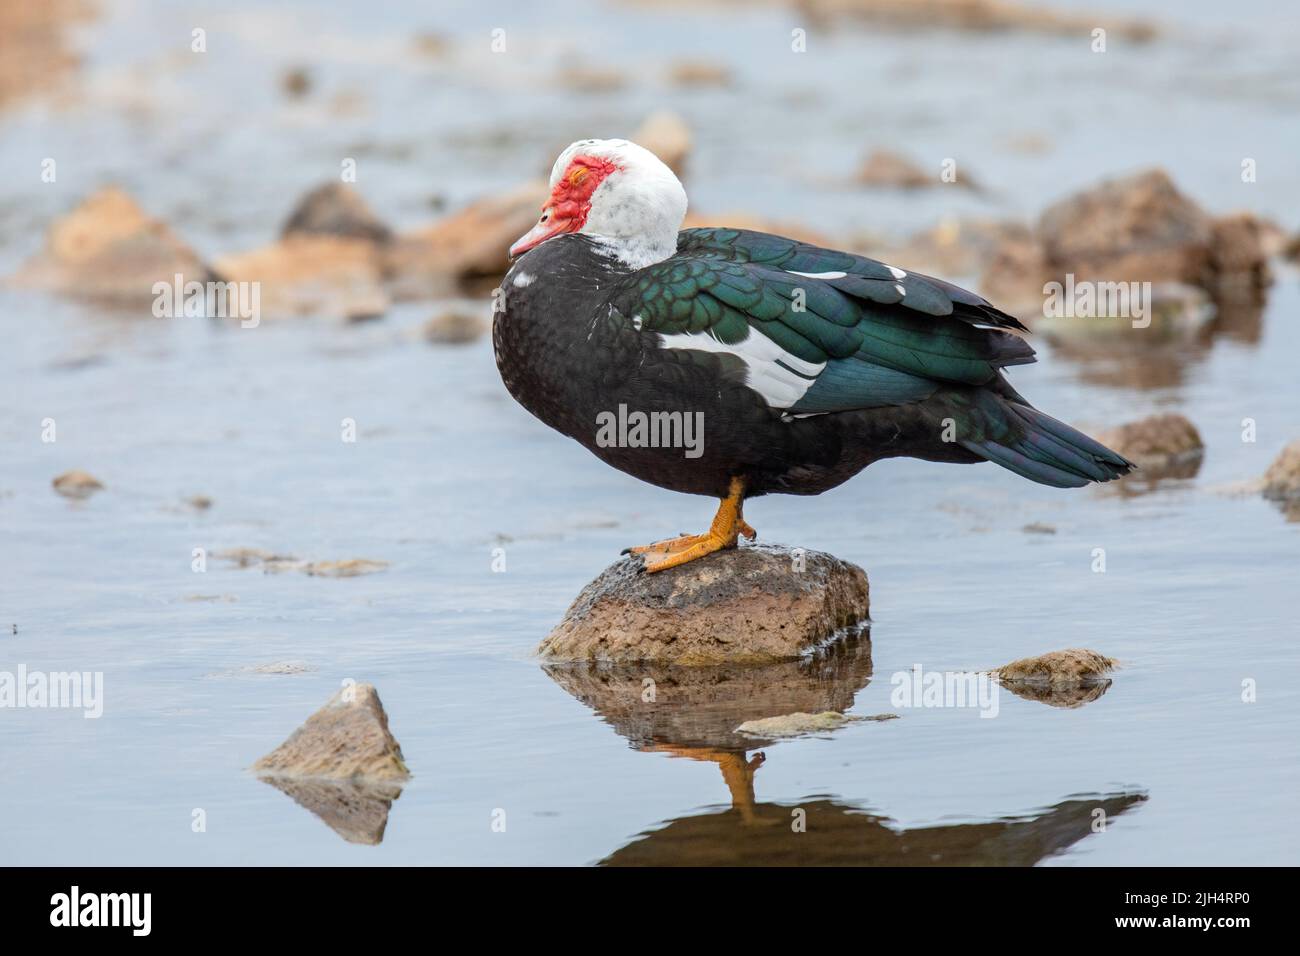 Barbary duck (Cairina moschata), stands on a stone in shallow water, Germany Stock Photo